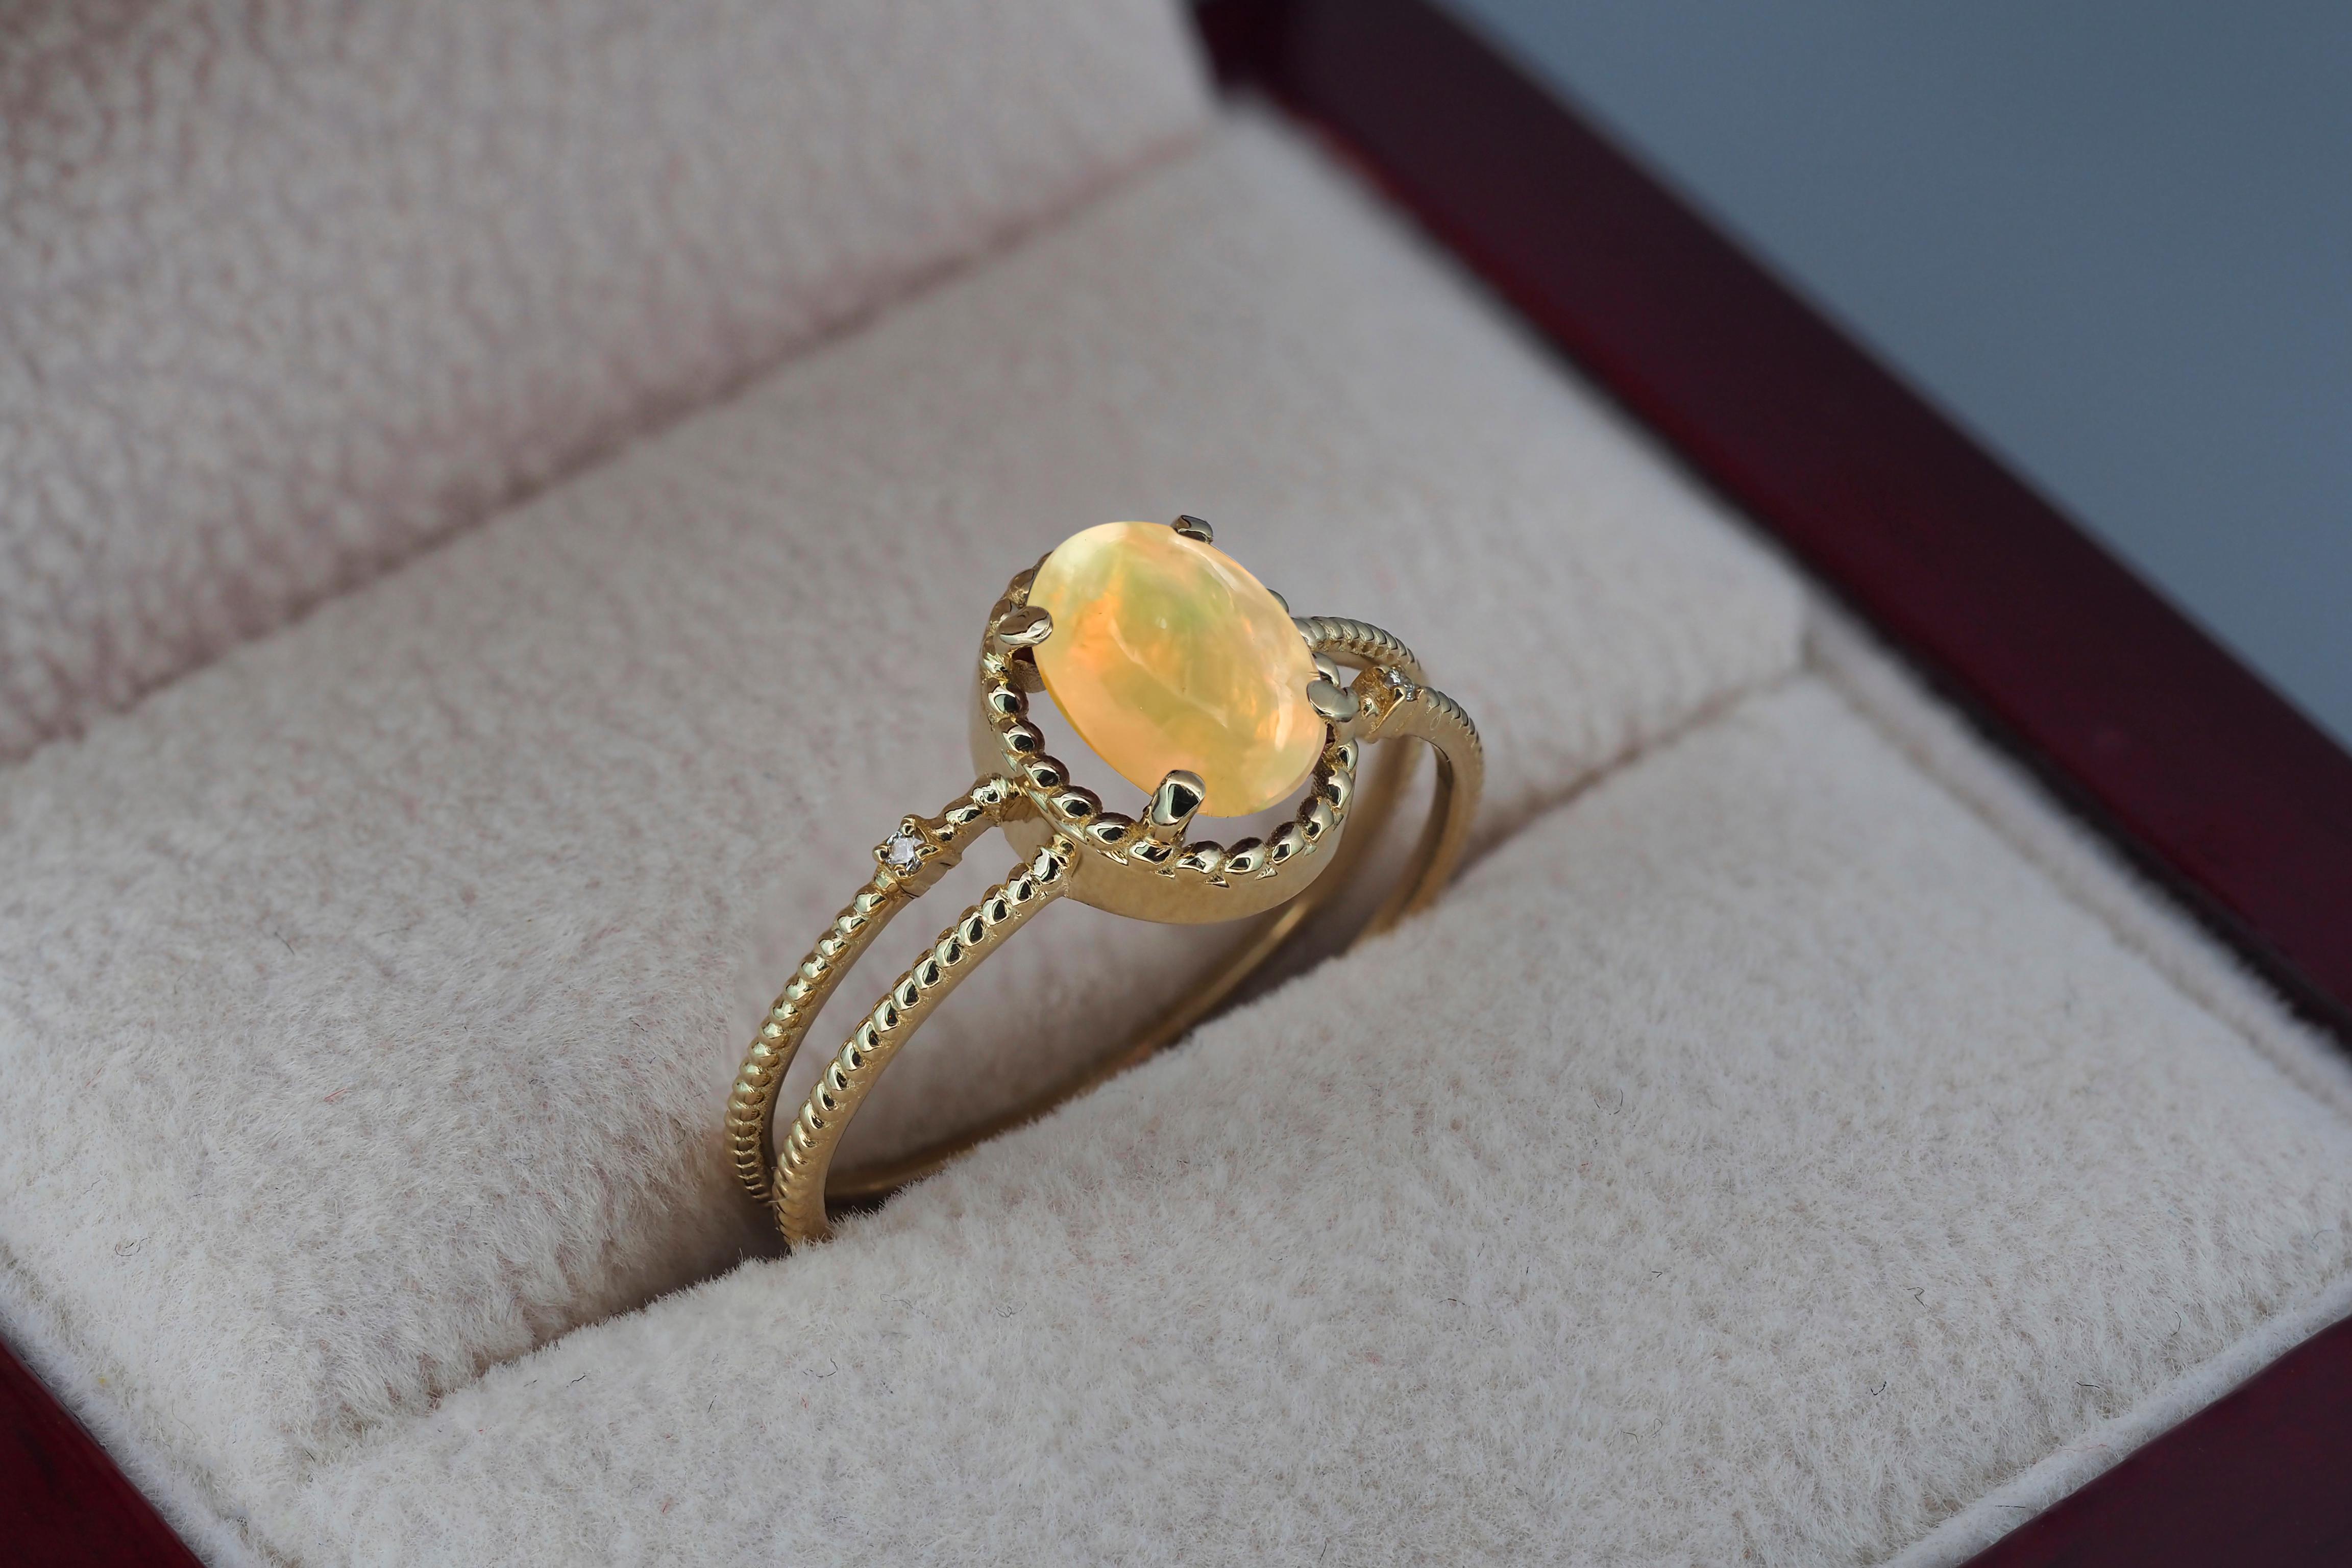 For Sale:  Cabochon Opal Ring. 14k Gold Ring with Opal. Minimalist Opal Ring 5